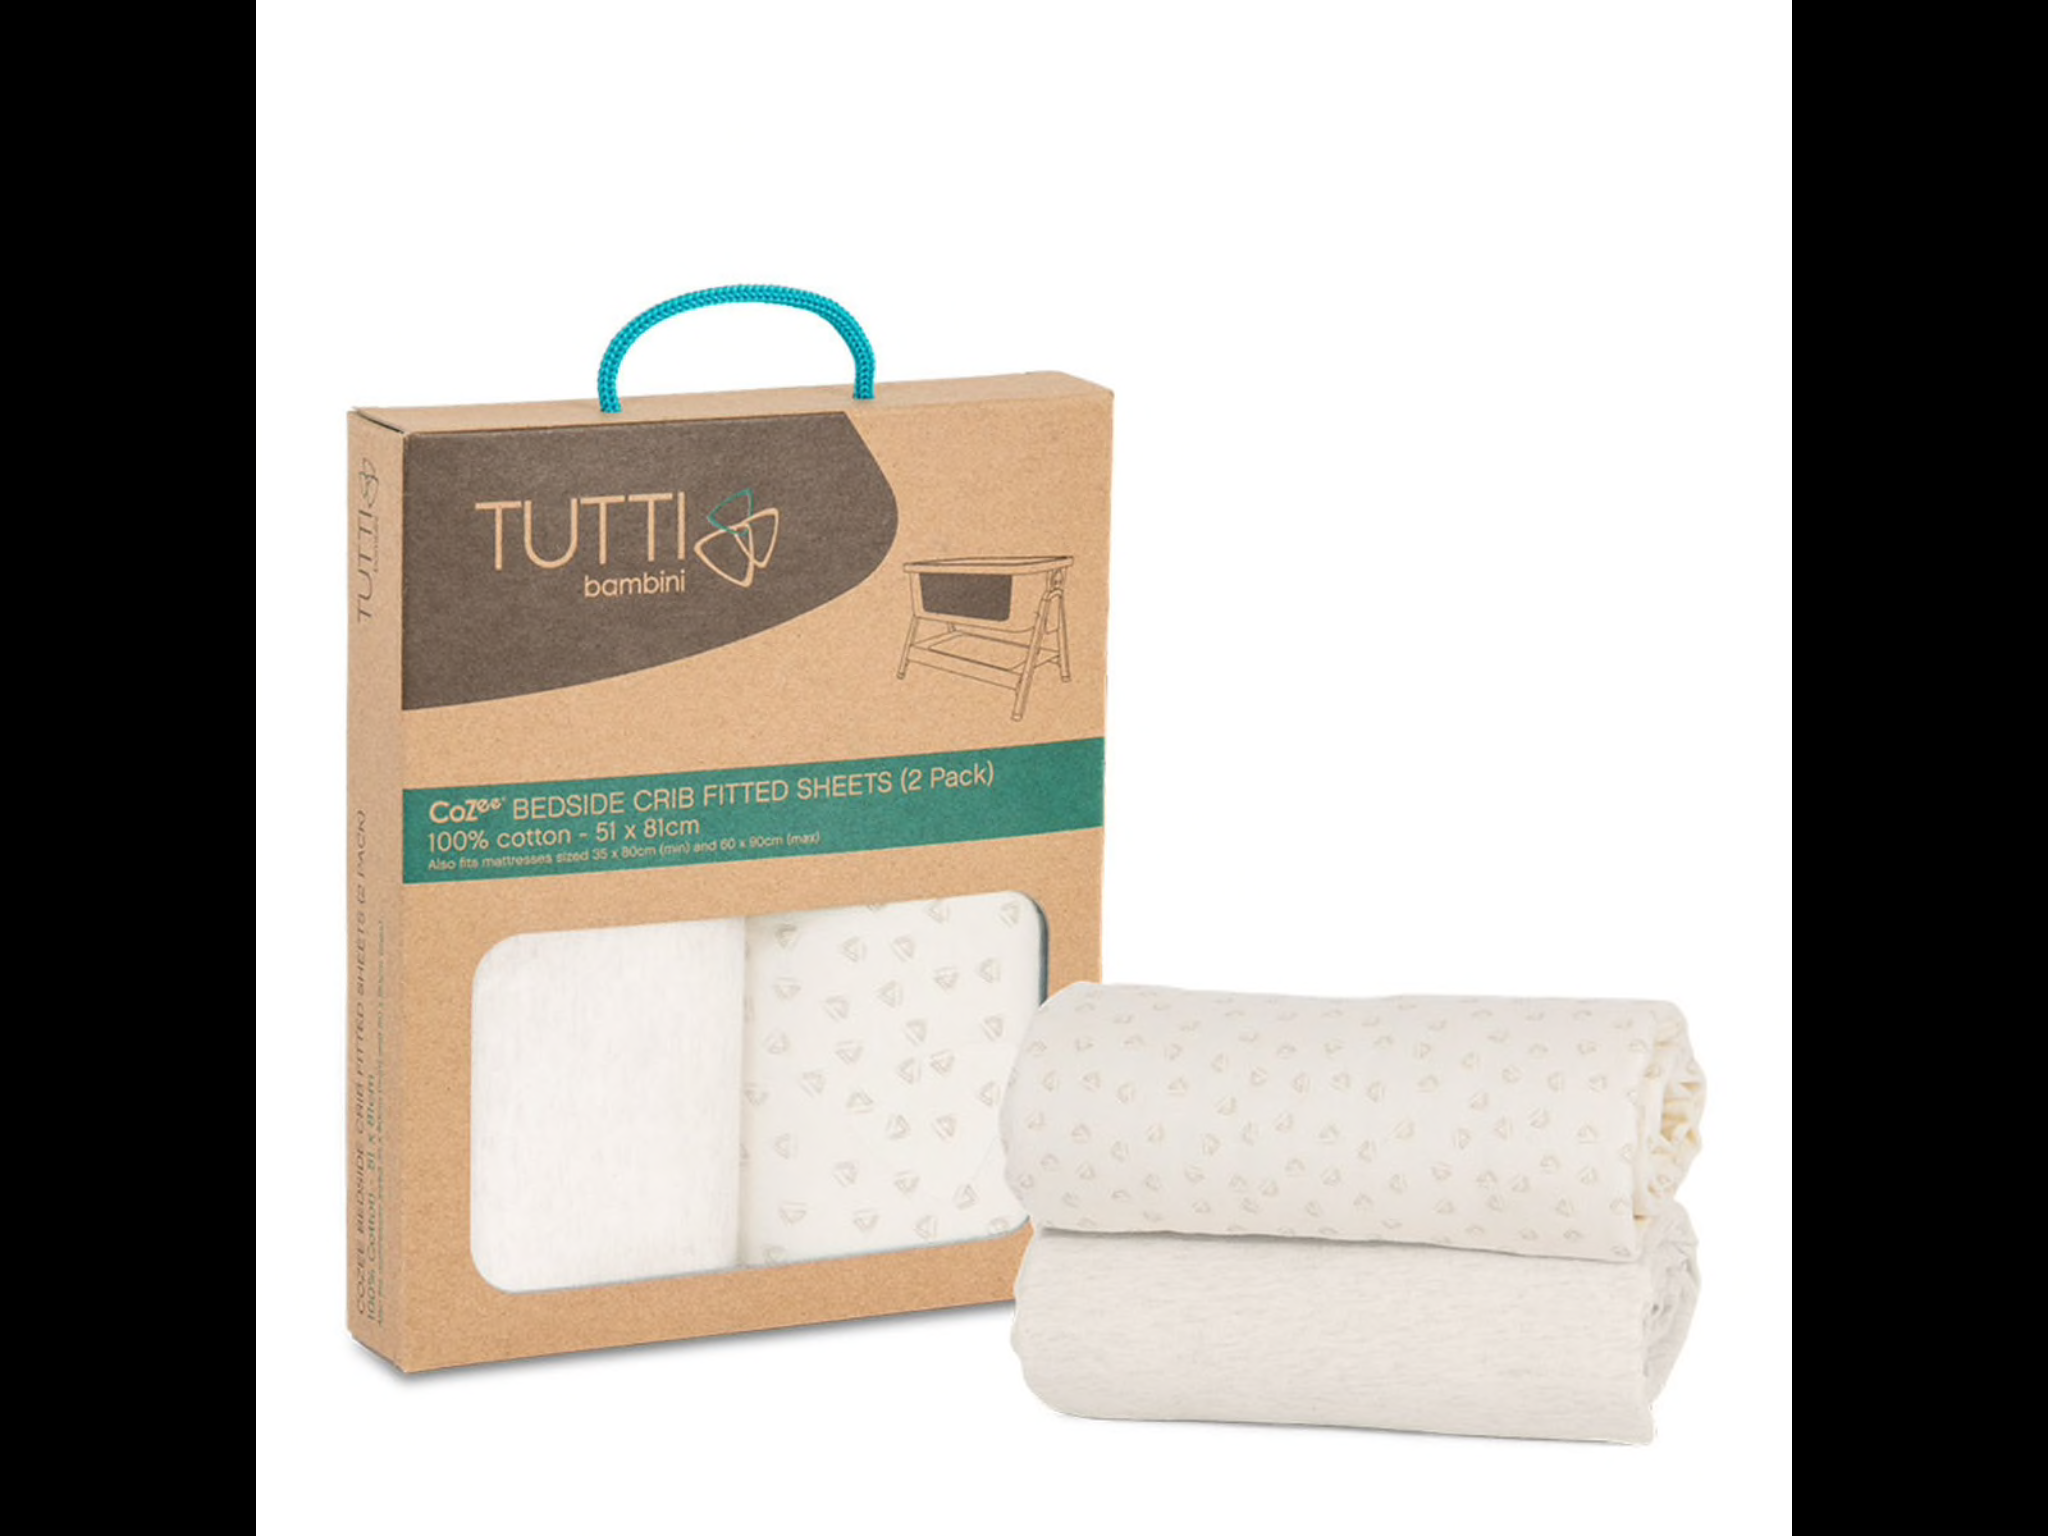 Tutti bambini fitted sheets